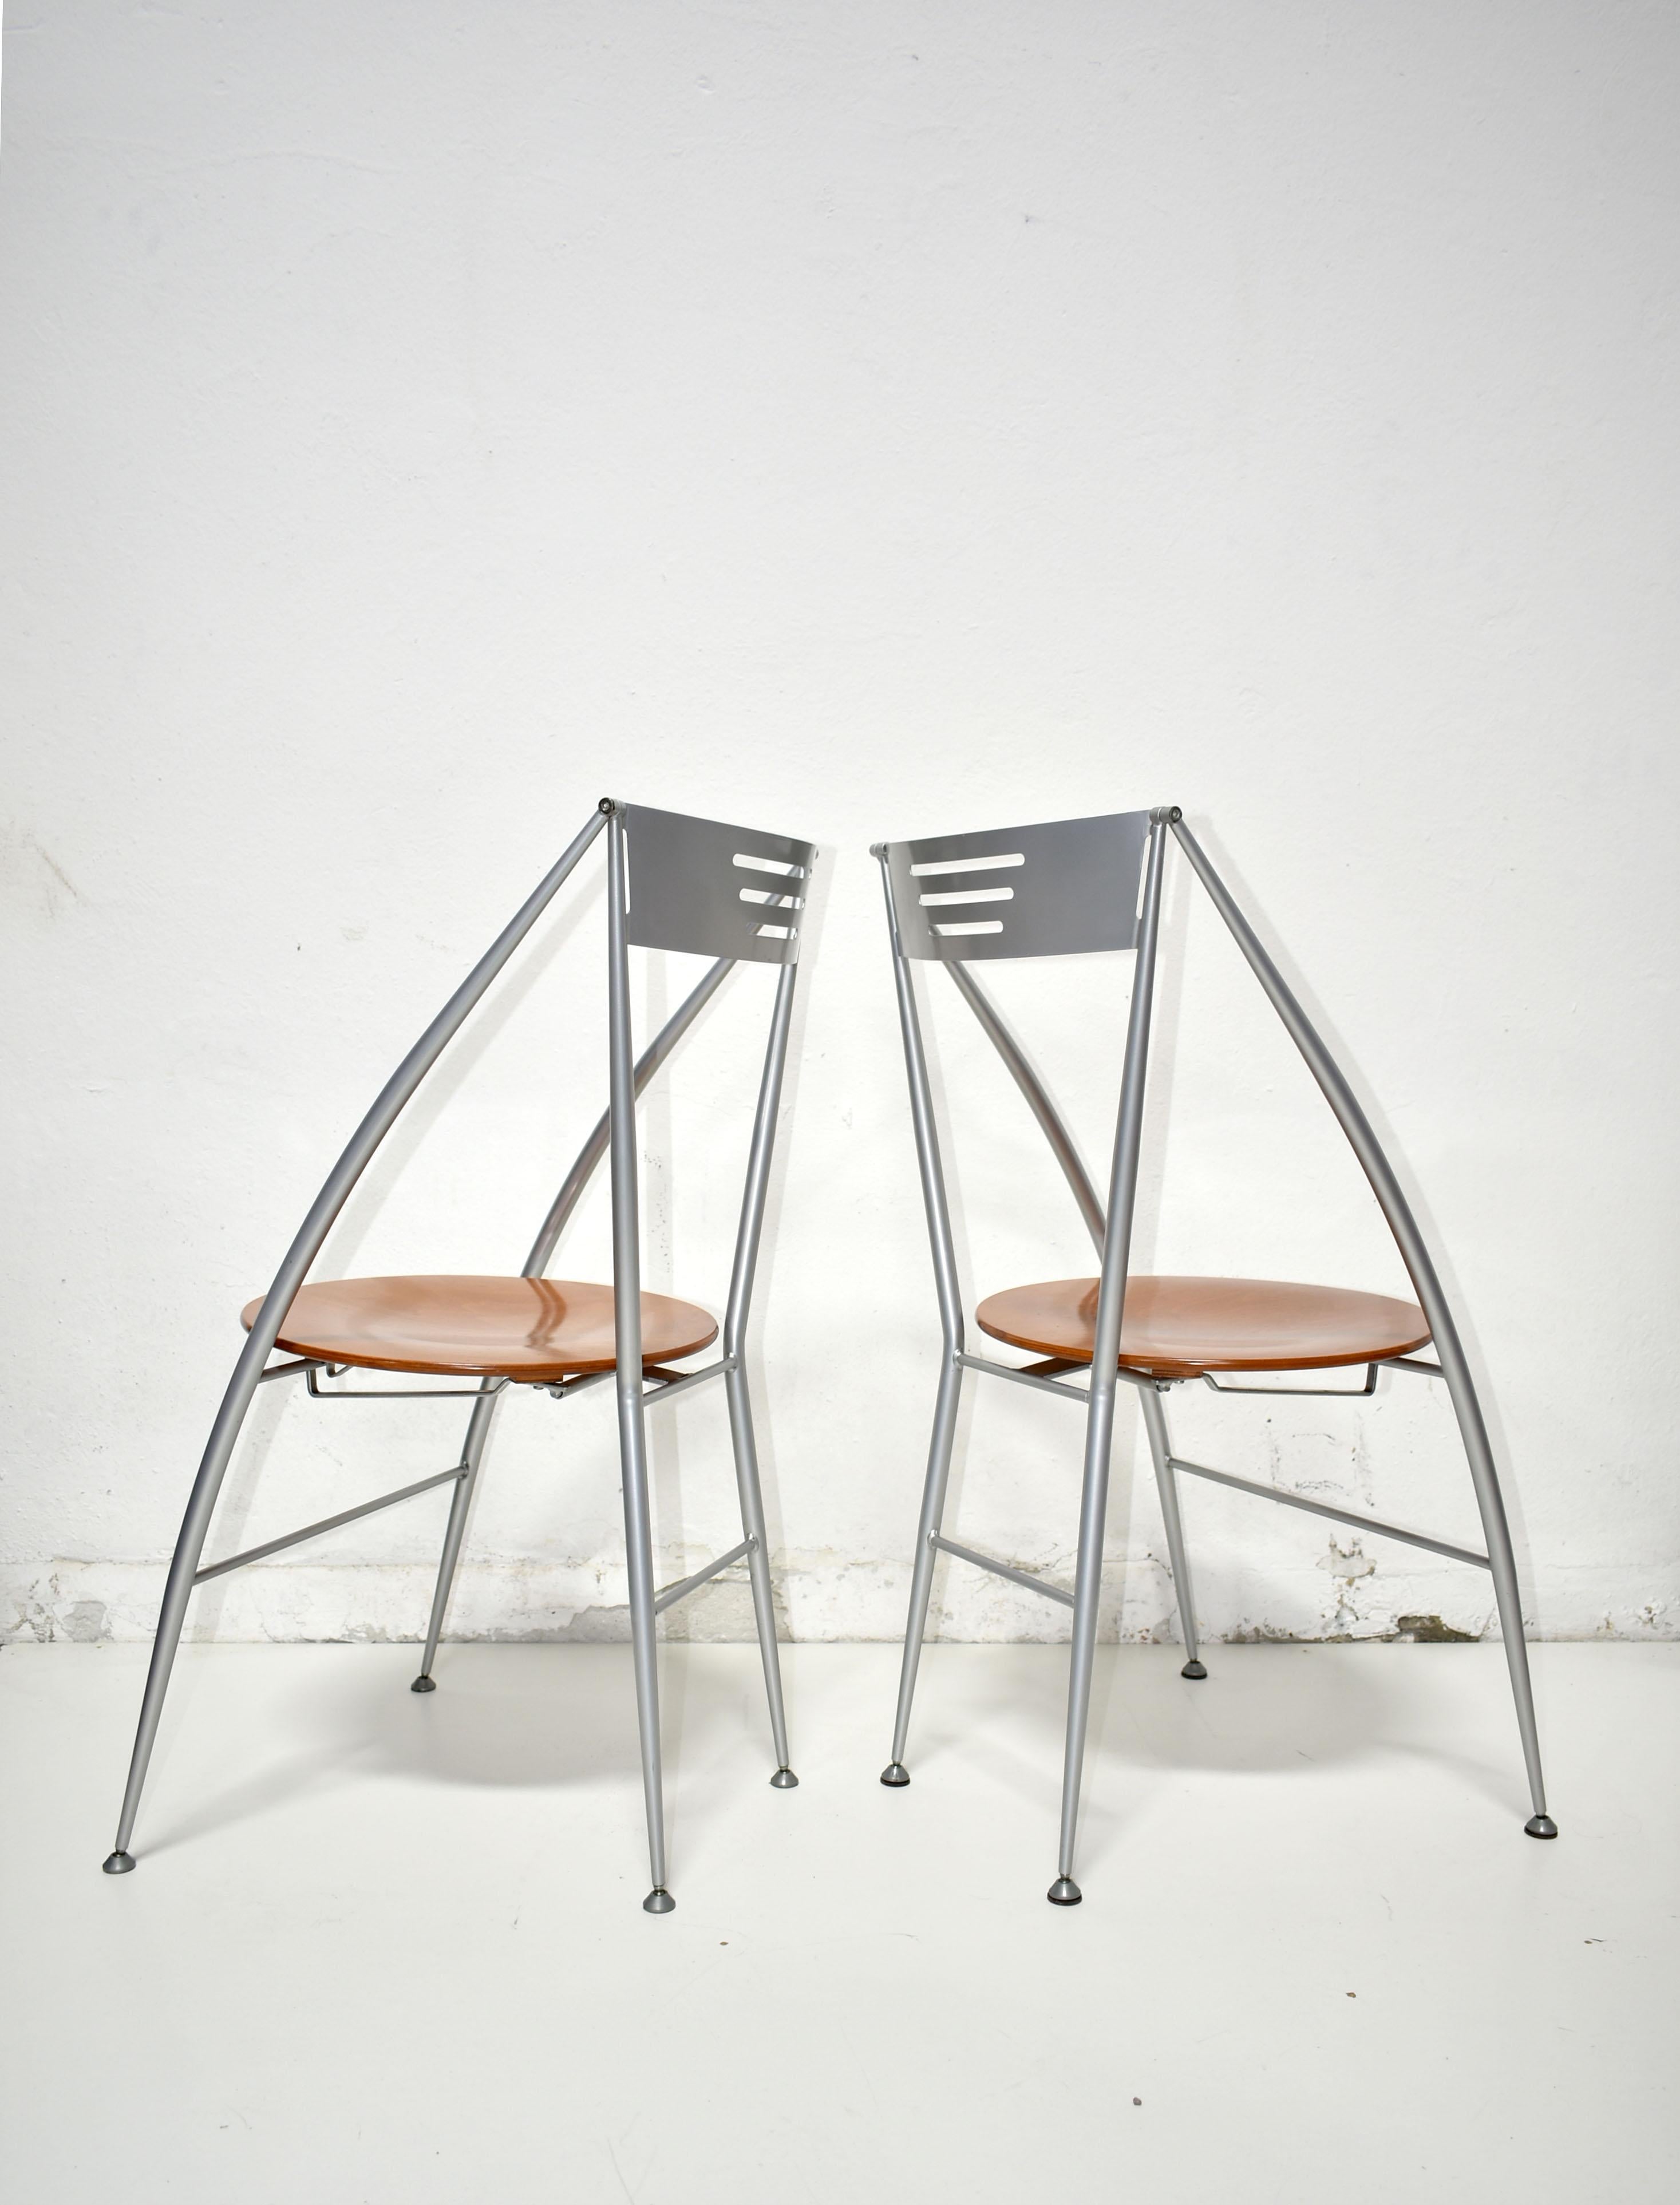 Cherry Set of 4 Folding Dining Chairs, Italy 1980s, Postmodern Design